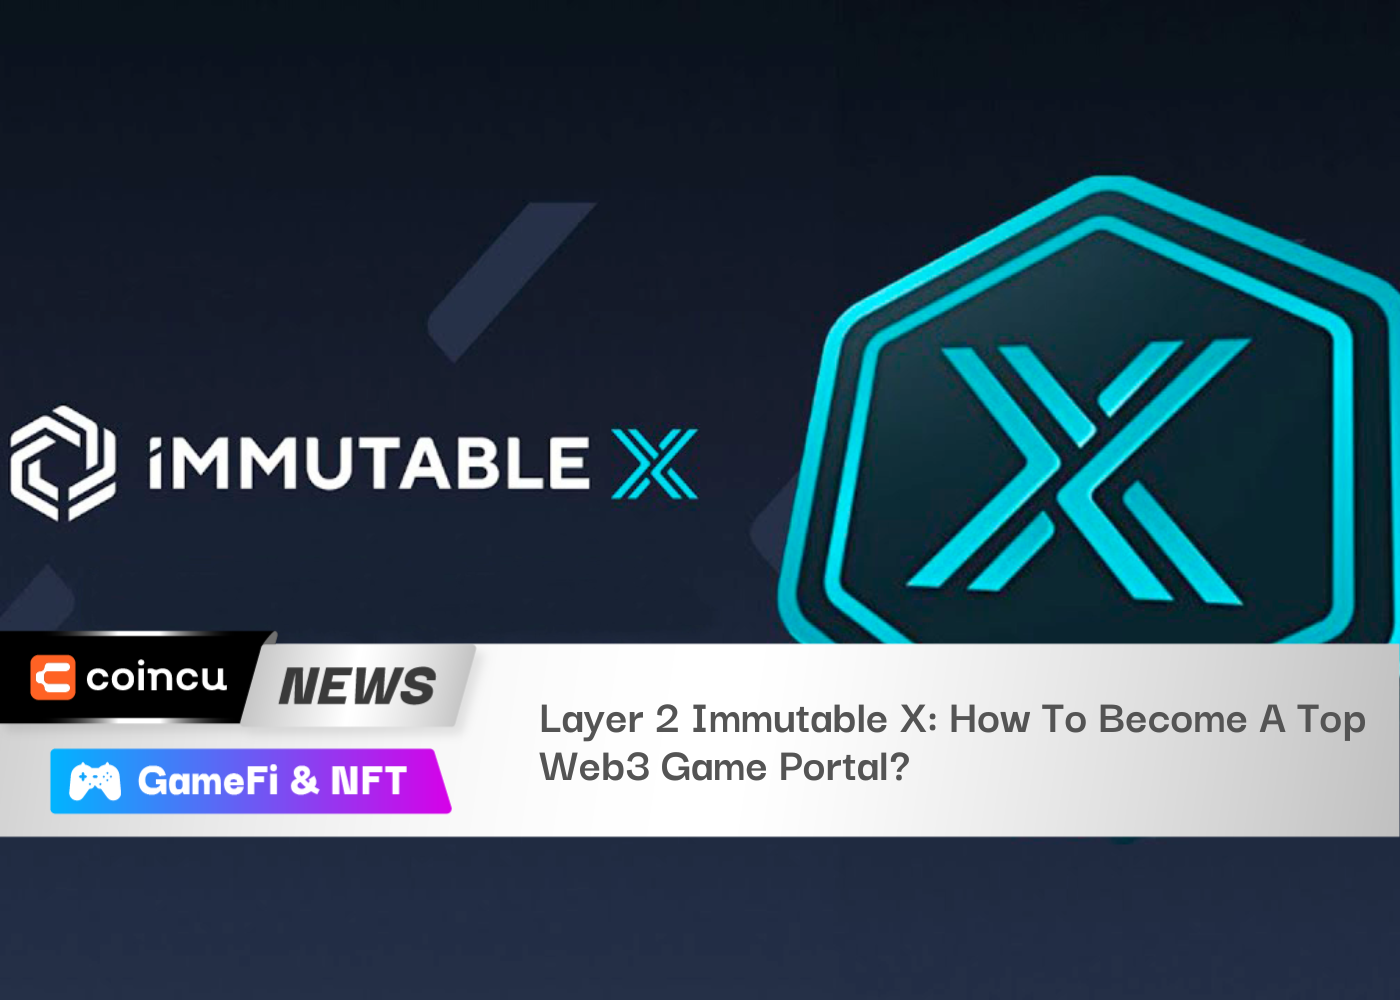 Layer 2 Immutable X: How To Become A Top Web3 Game Portal?